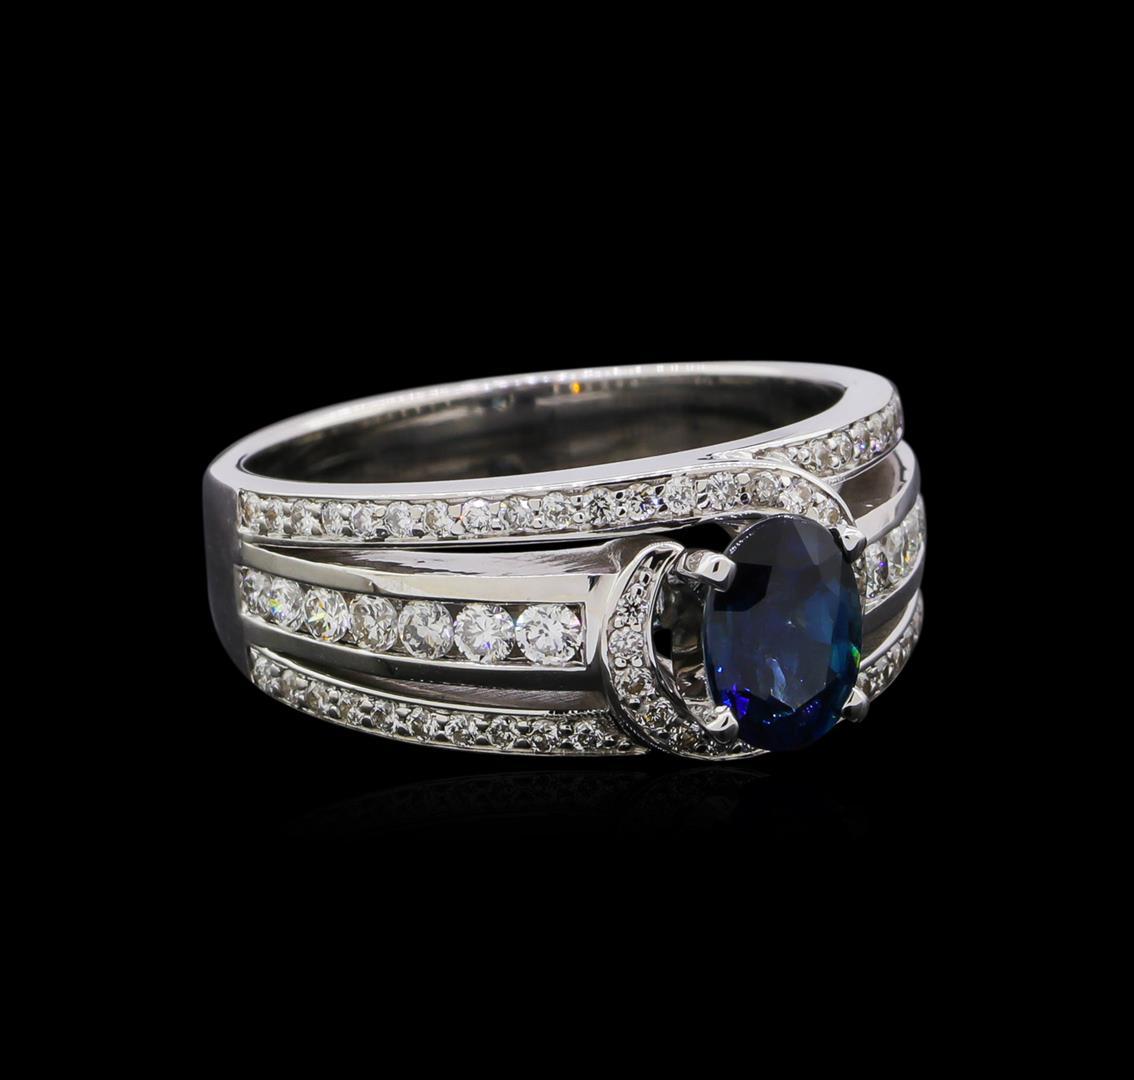 1.21 ctw Sapphire and Diamond Ring - 18KT White Gold